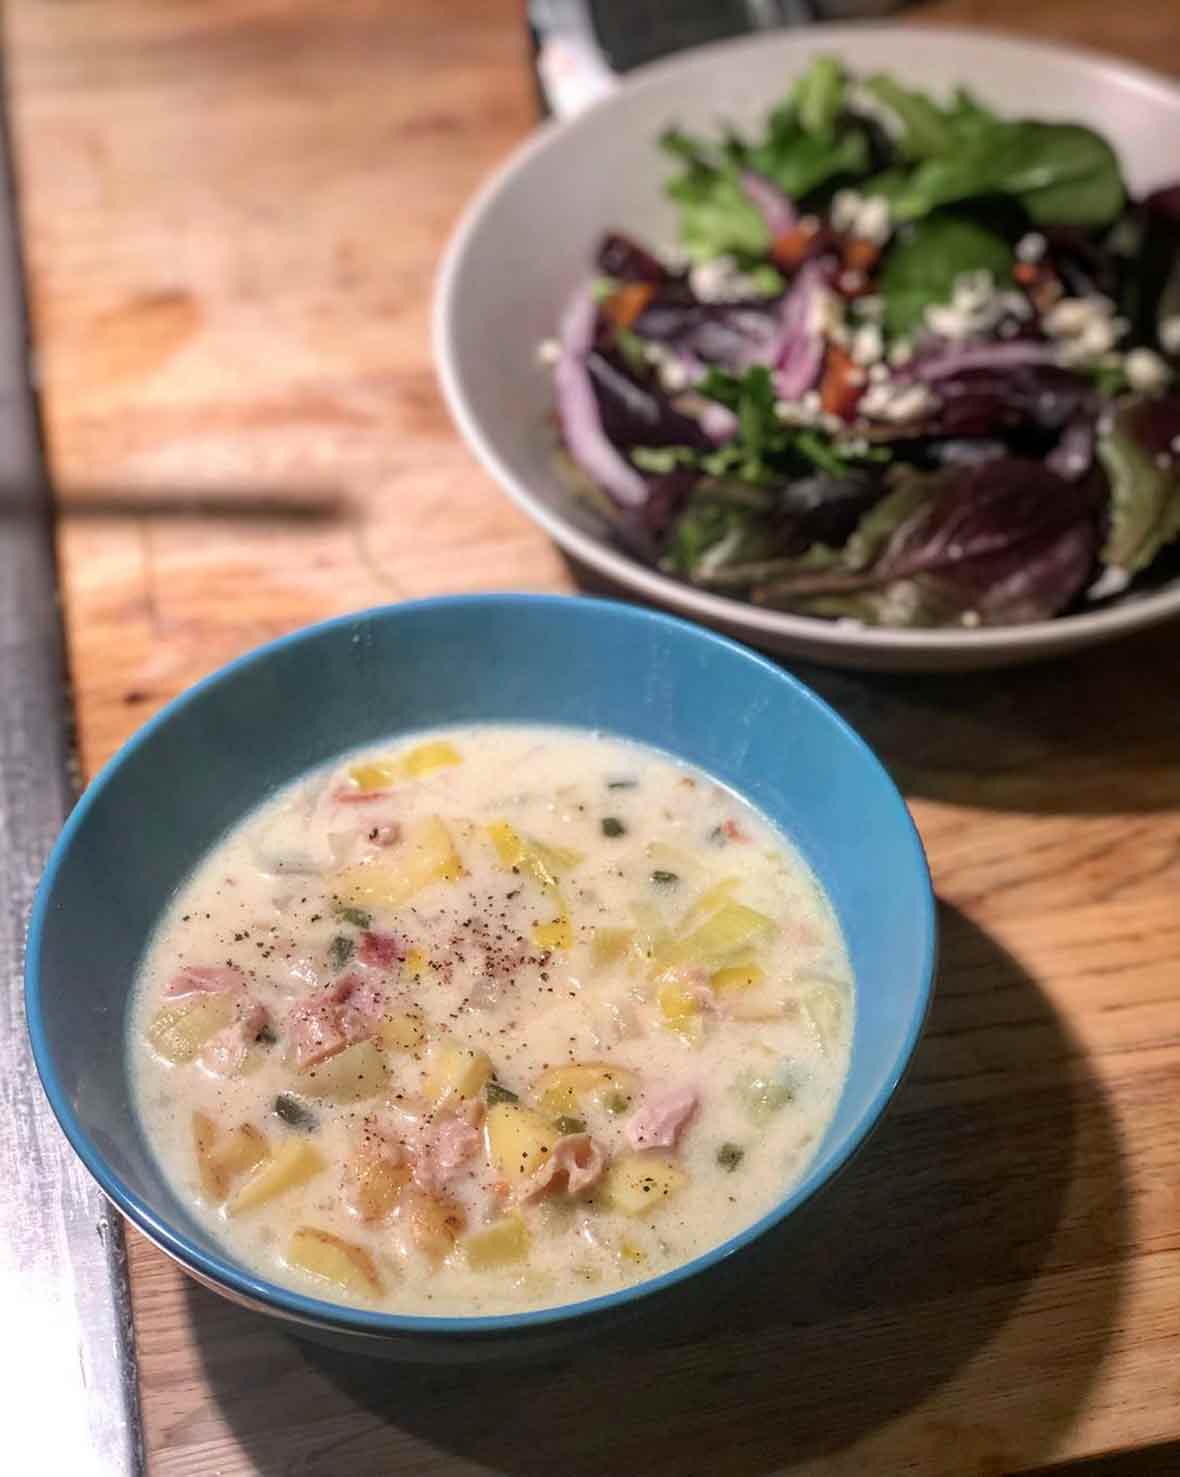 A bowl of creamy New England clam chowder with a side salad